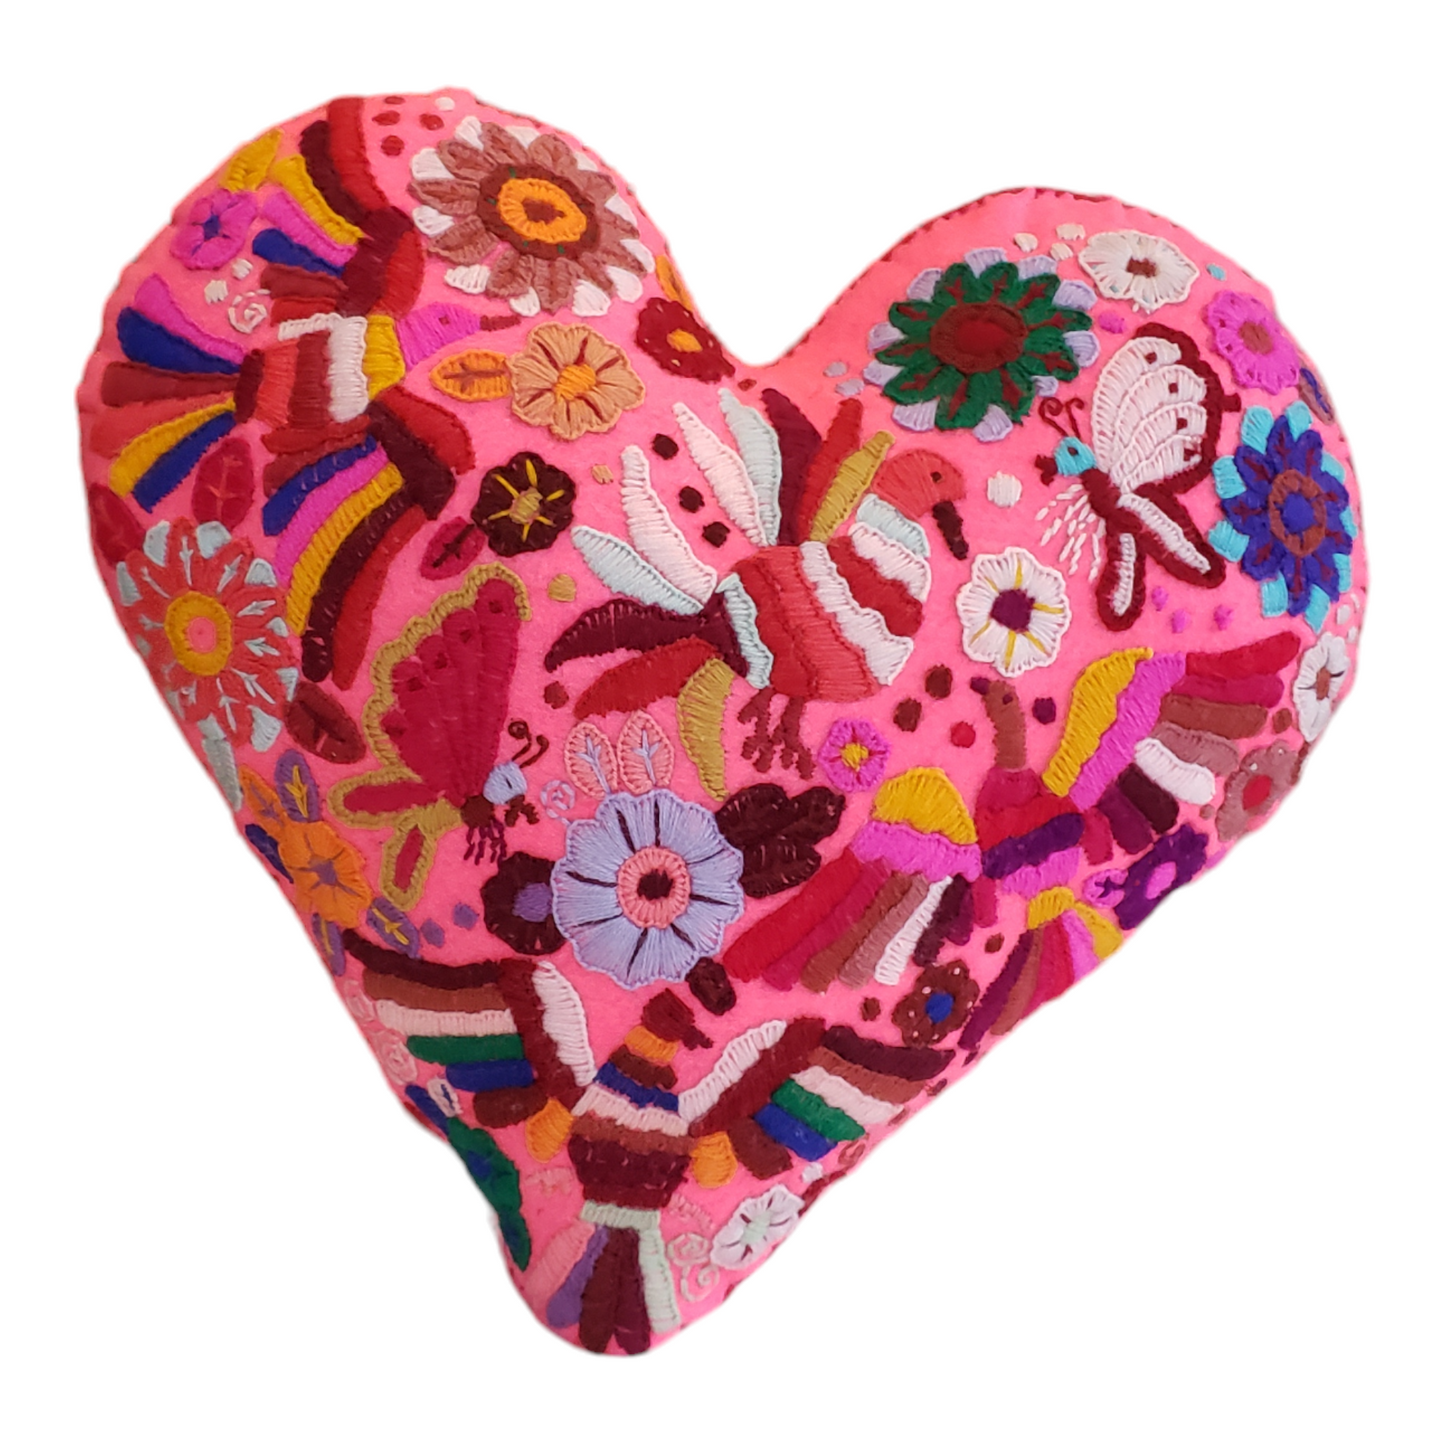 Large Heart Felt Embroidered Pillow